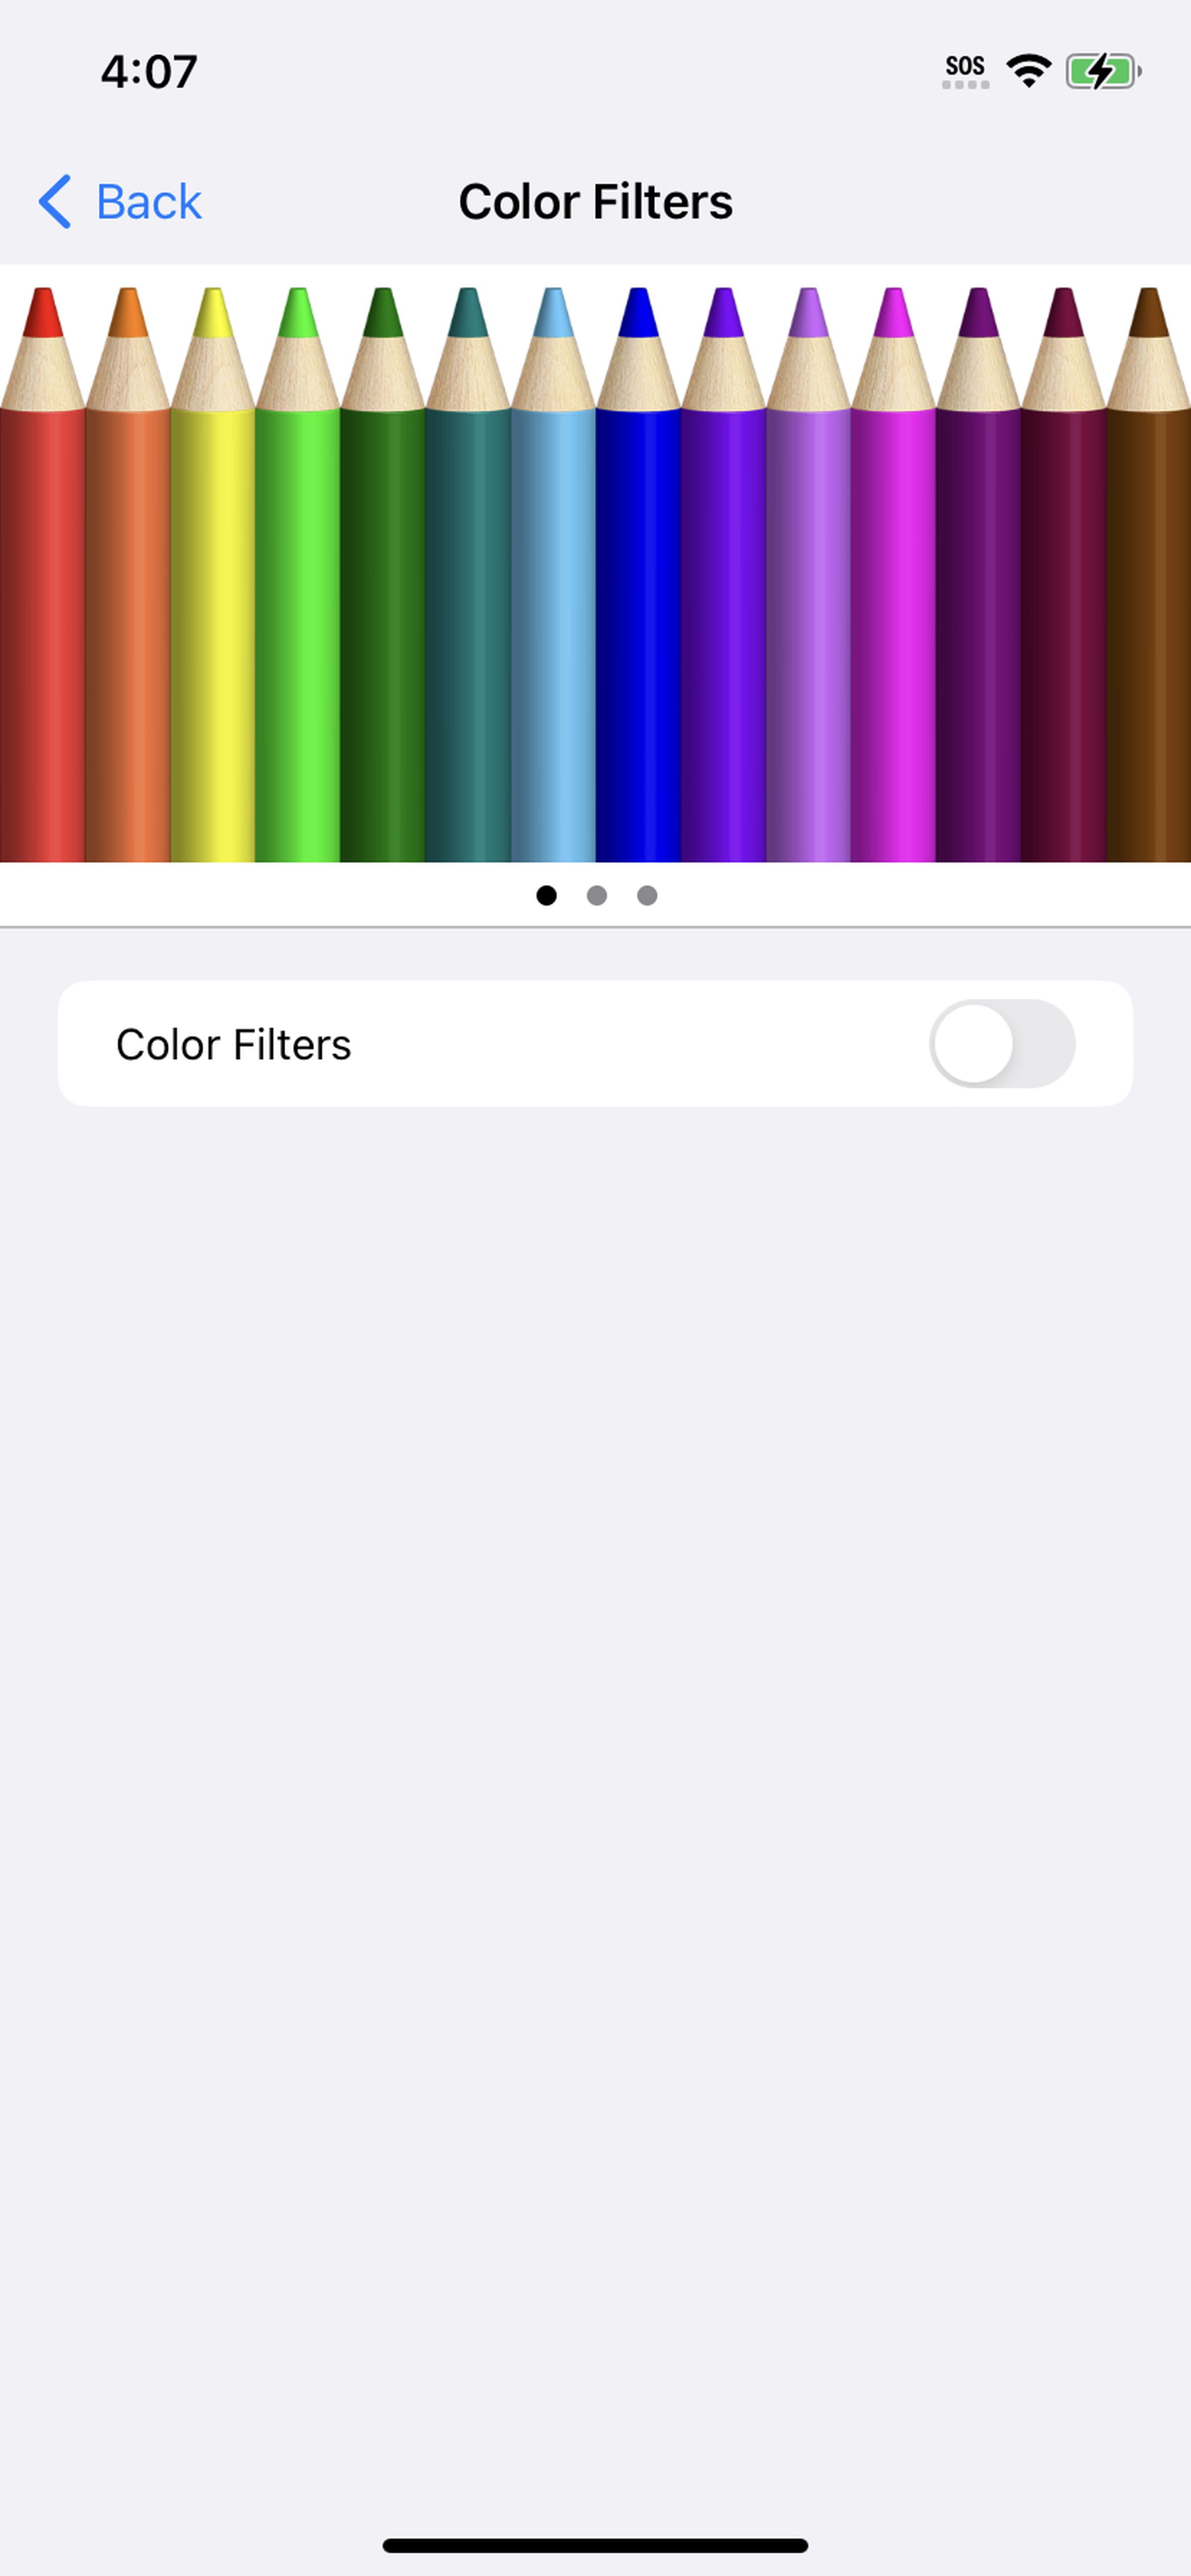 Color Filters page showing pencils of different colors on top and a Color Filters toggle below that.